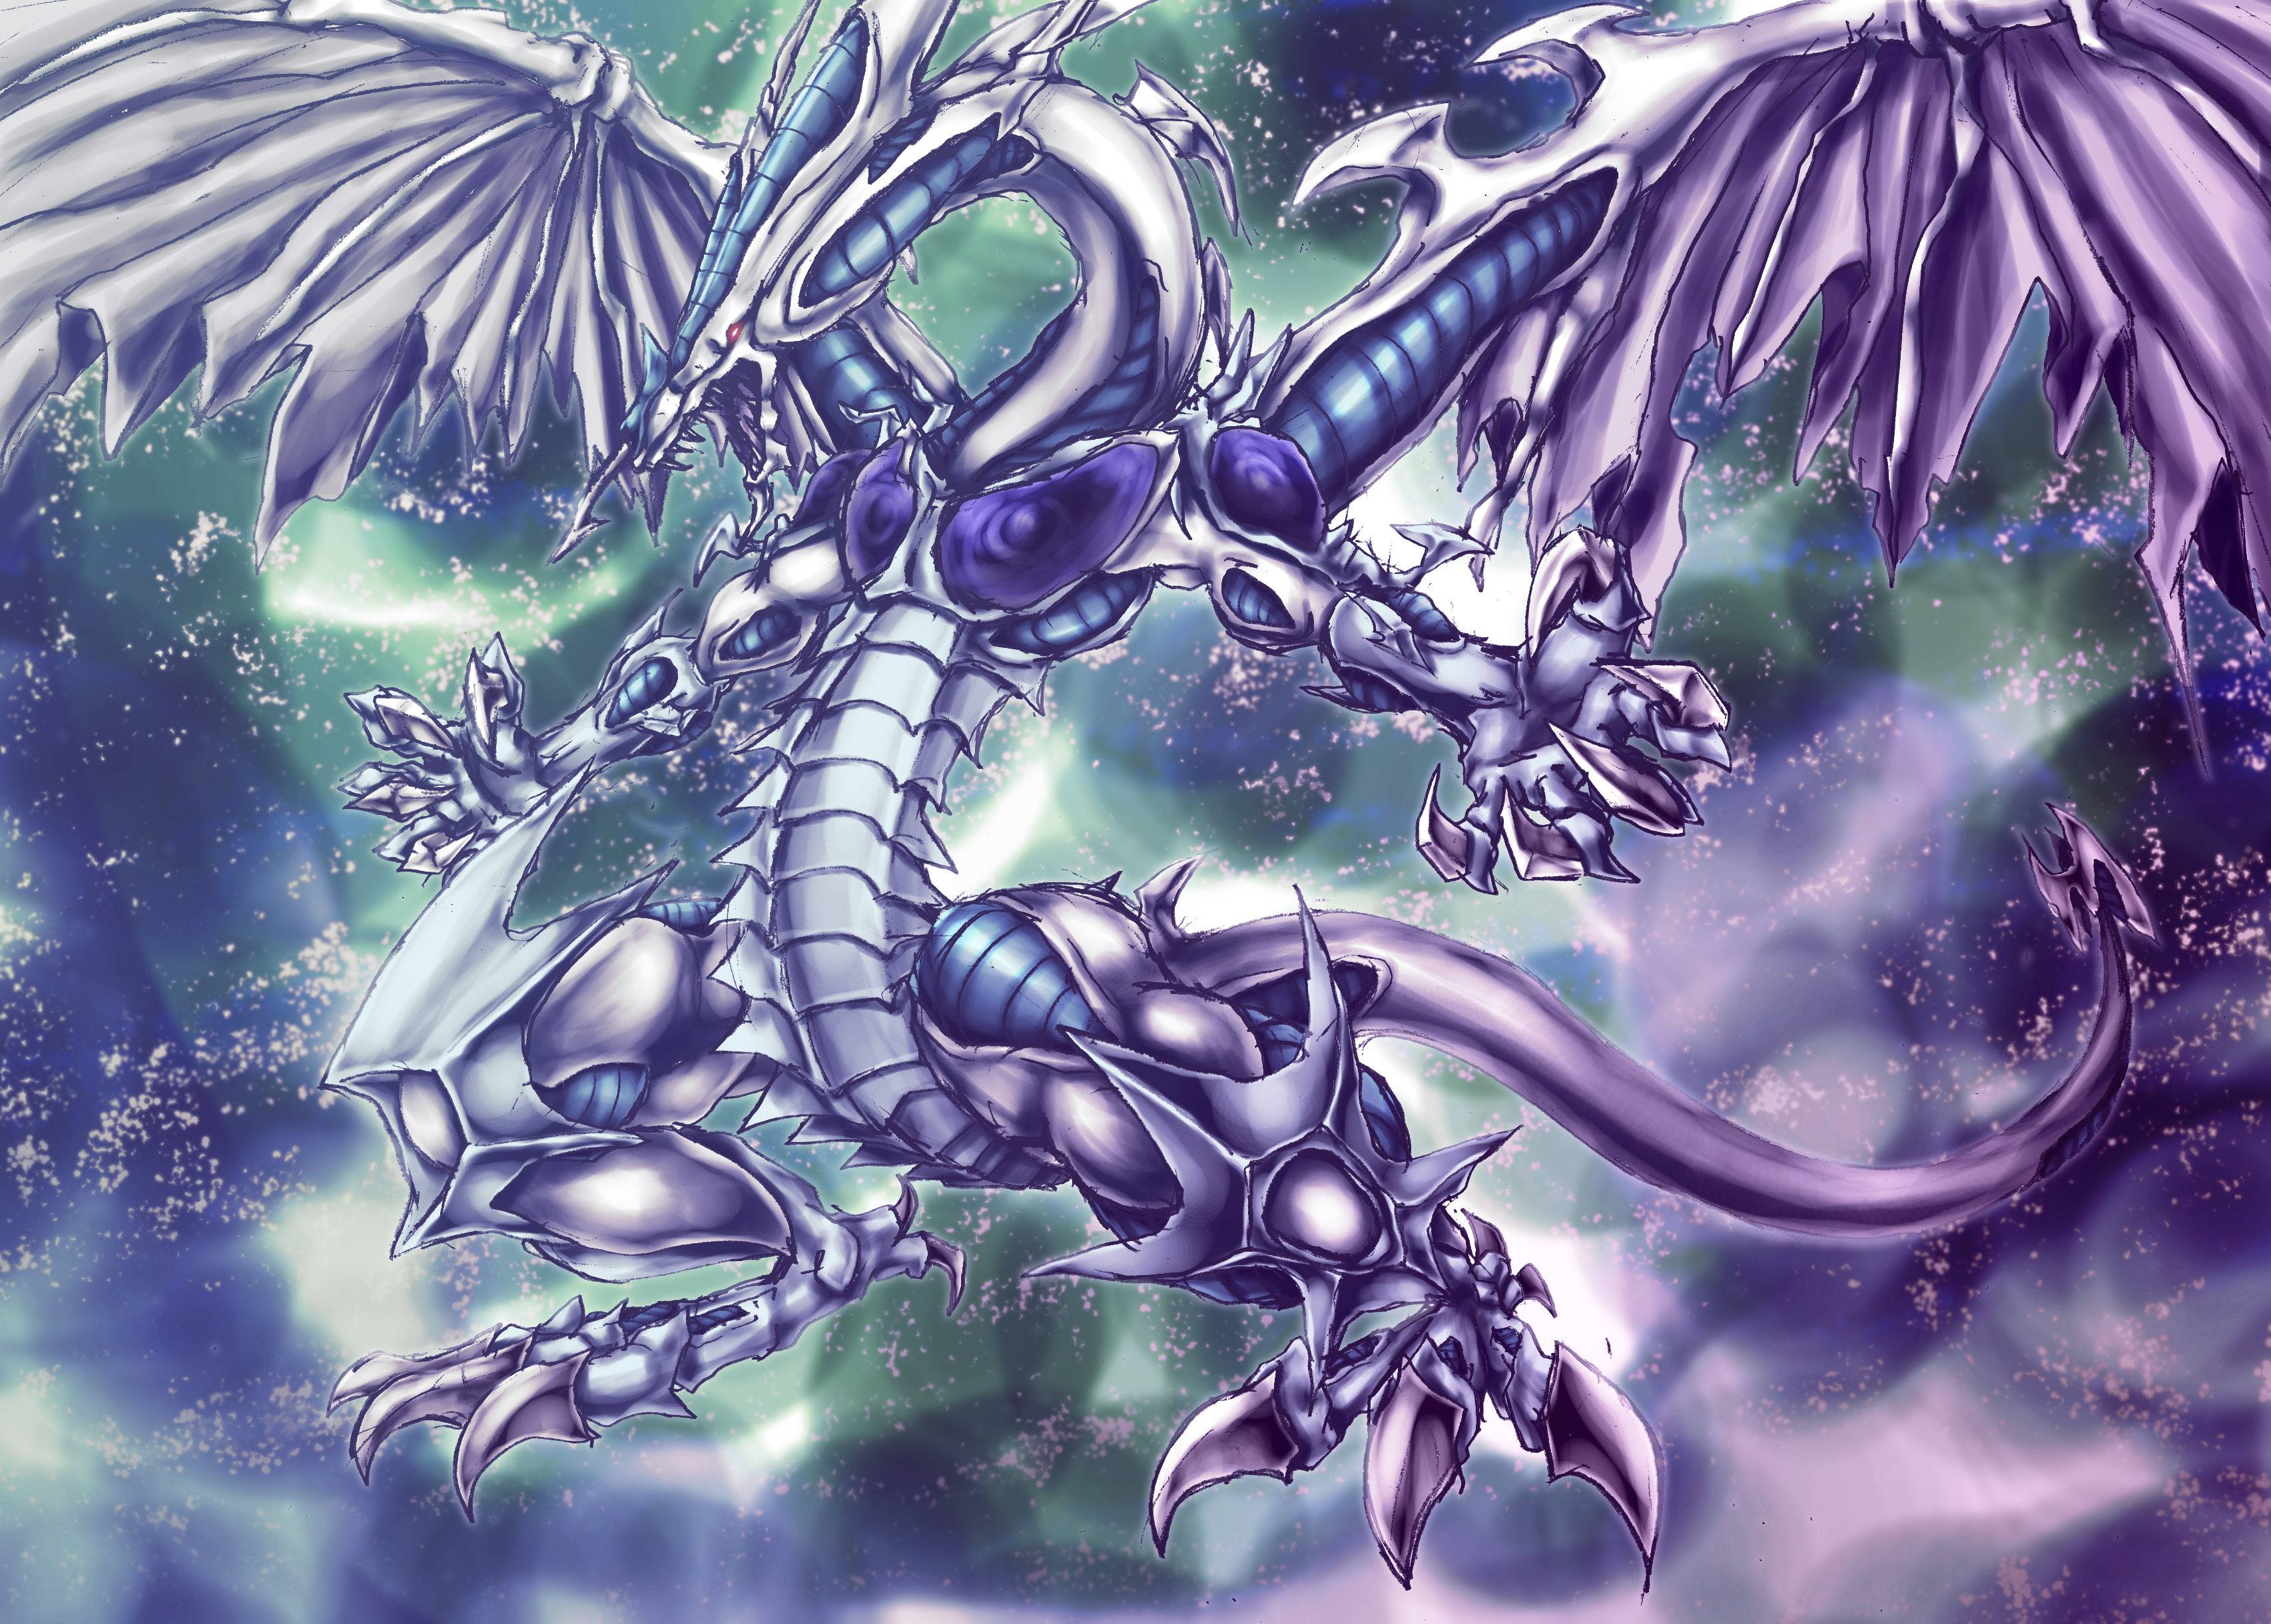 Stardust Dragon Wallpapers - Wallpaper Cave